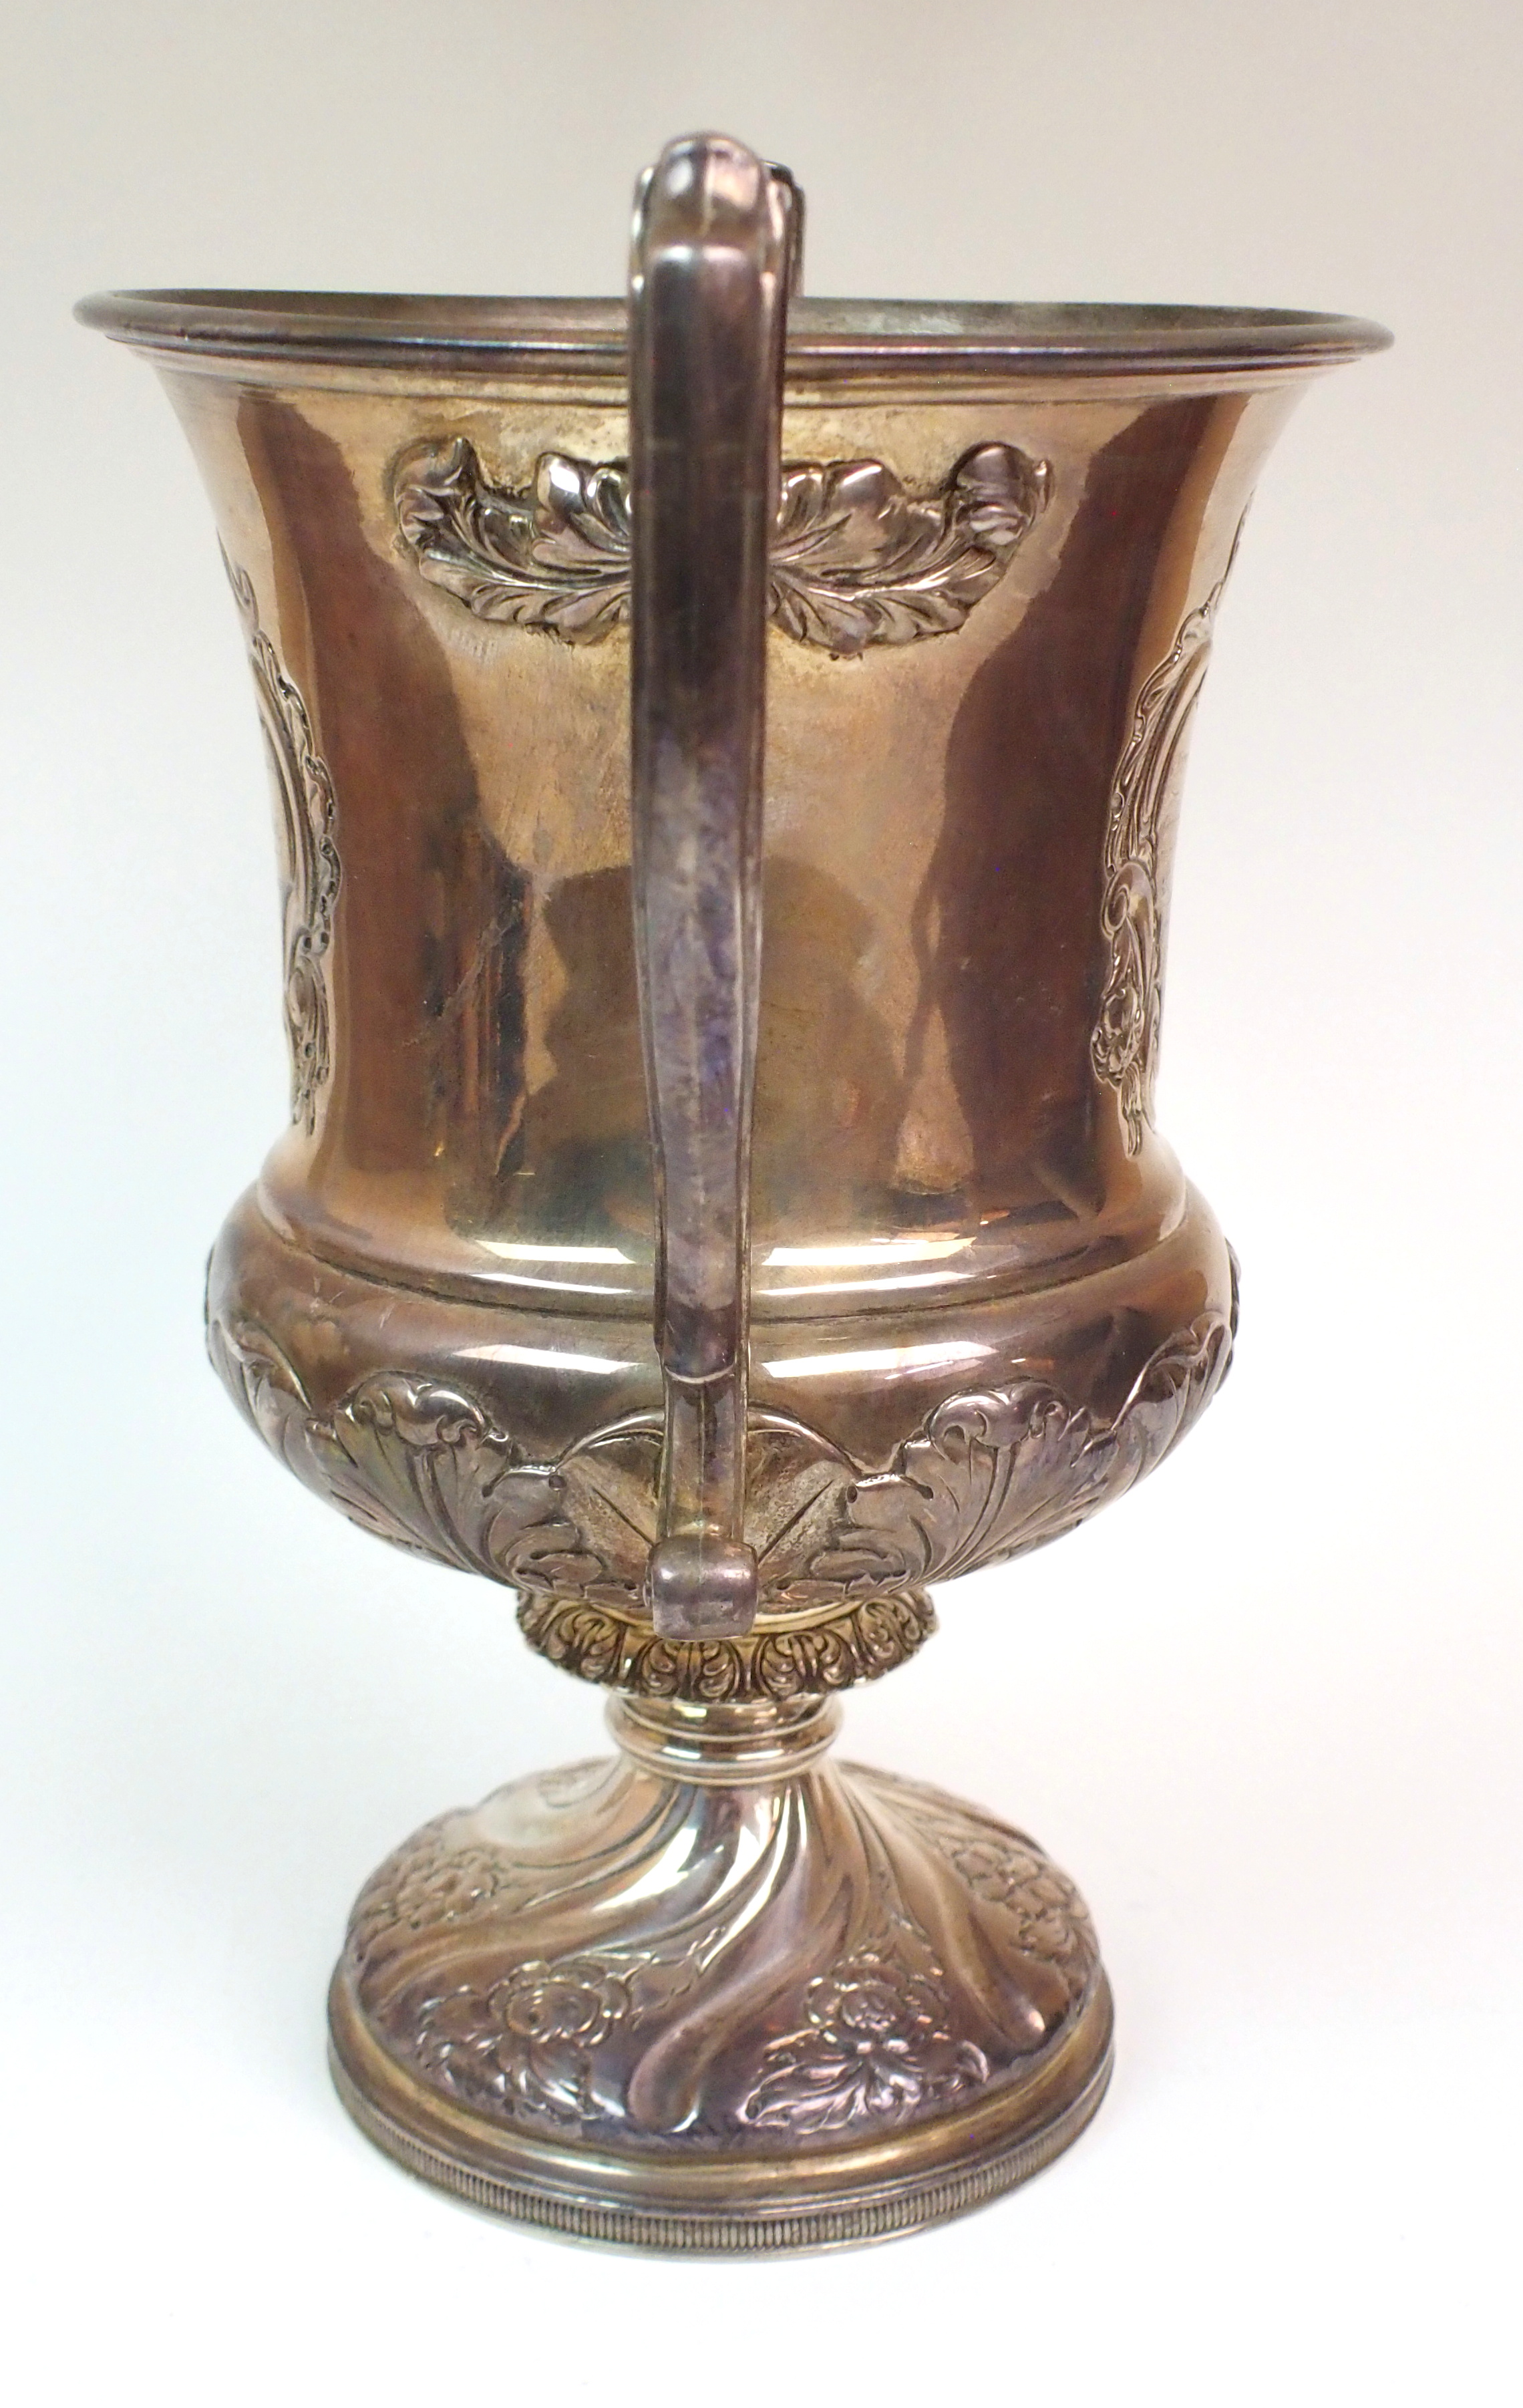 A LATE GEORGE III SILVER TROPHY CUP possibly by Alexander Edmondstoun III, Edinburgh 1817, of - Image 4 of 10